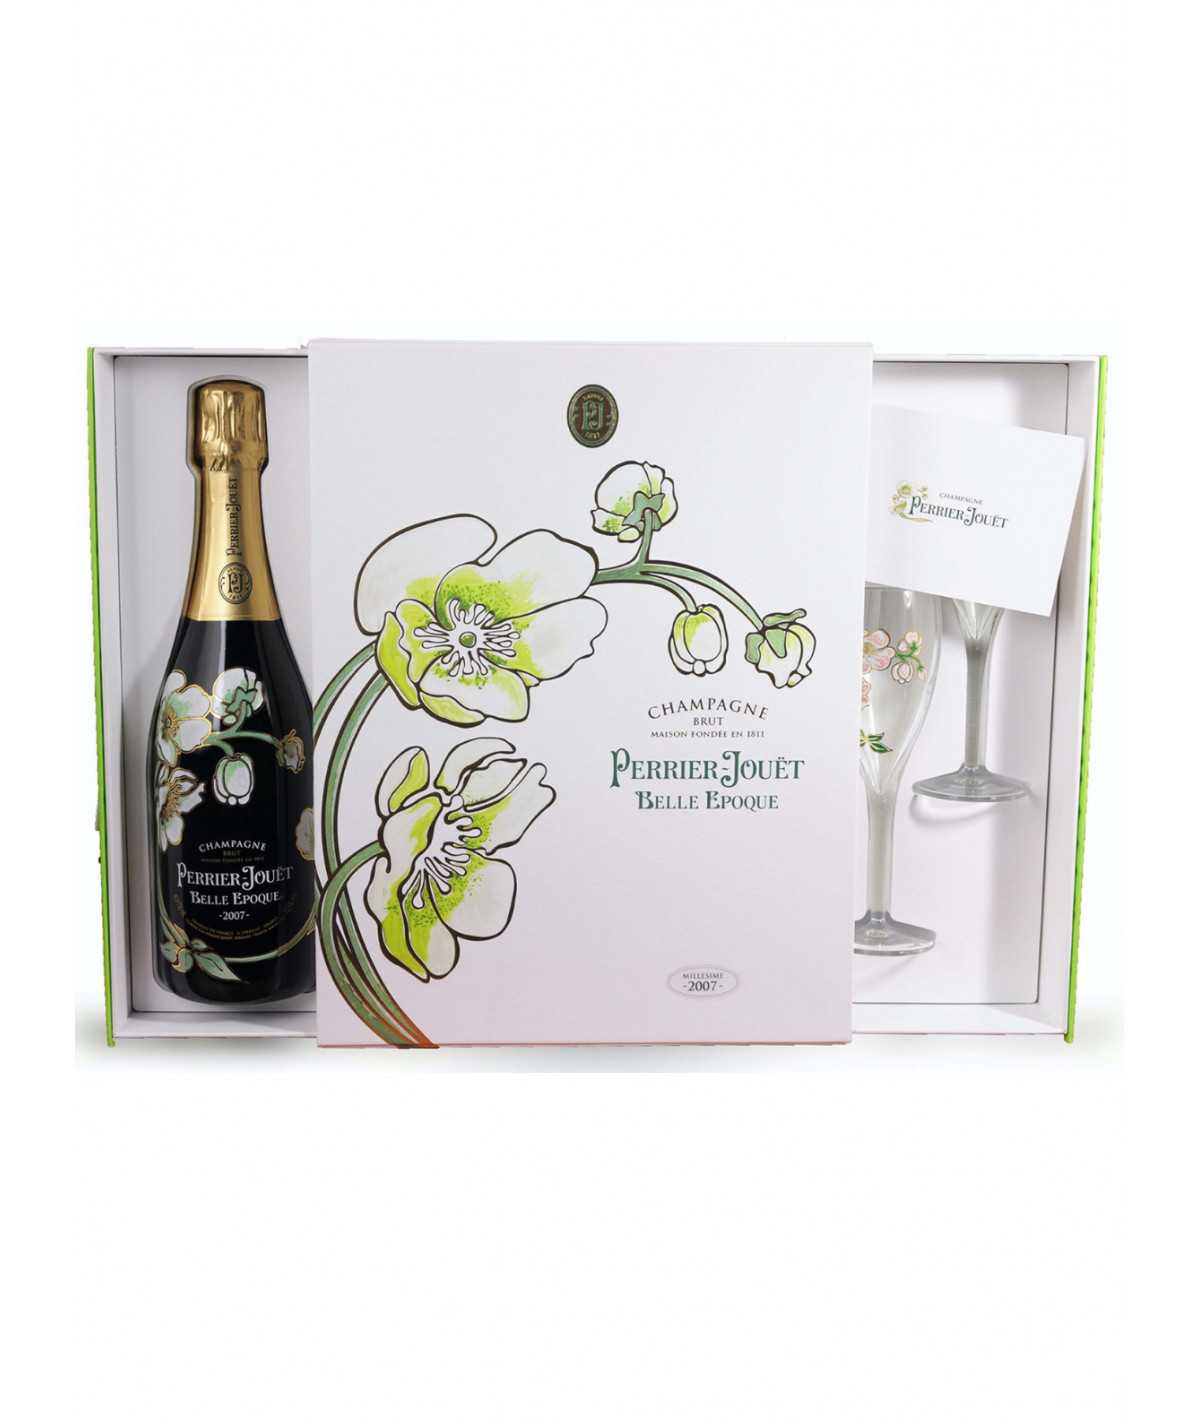 Champagne Gift set PERRIER JOUET Belle Epoque 2008 with 2 glasses